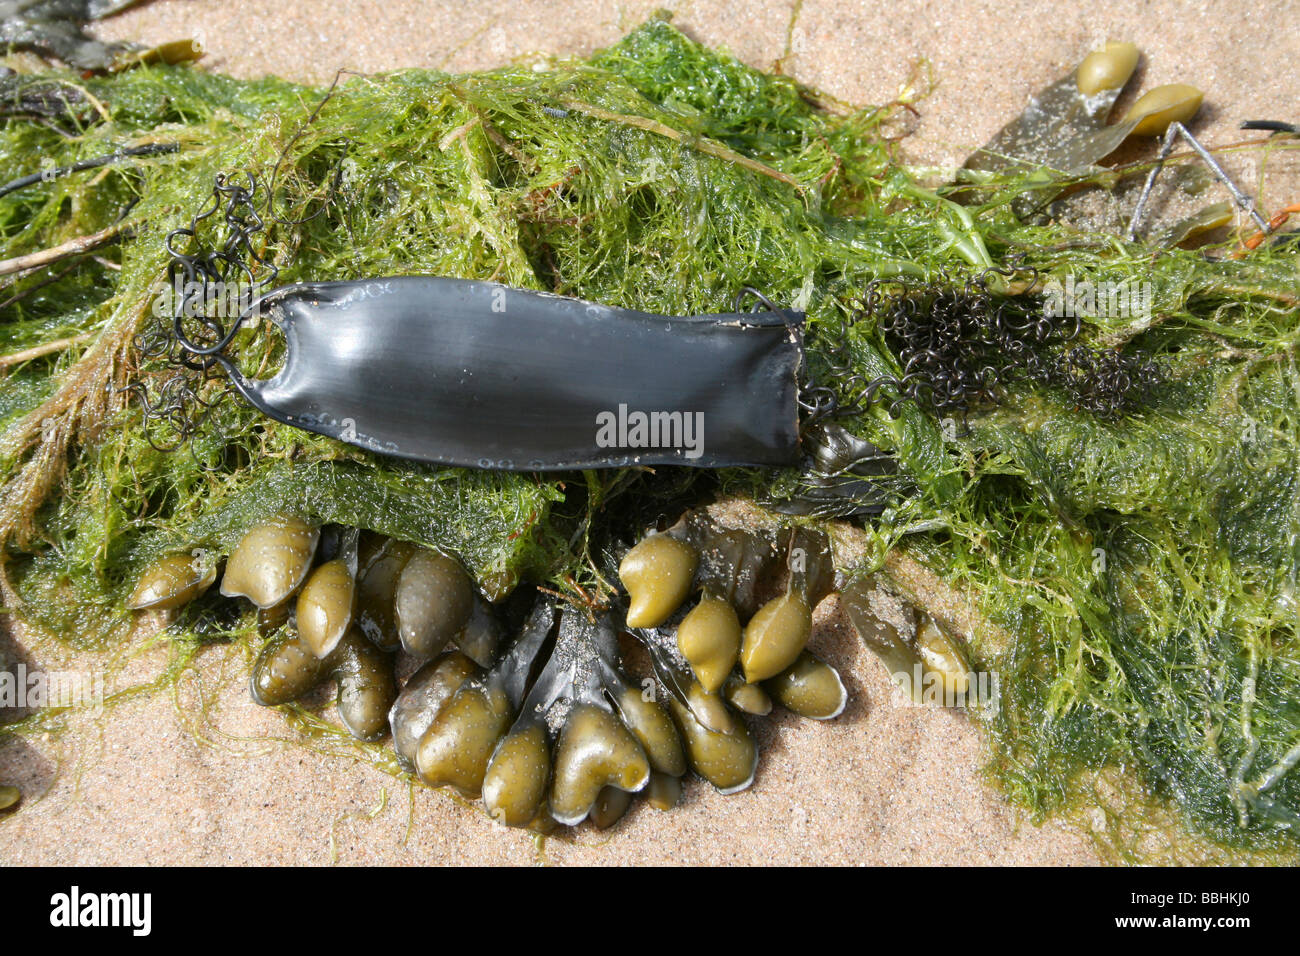 Mermaid's Purse: The Egg Case Of A Lesser Spotted Dogfish Scyliorhinus canicula At New Brighton, Wallasey, The Wirral, UK Stock Photo